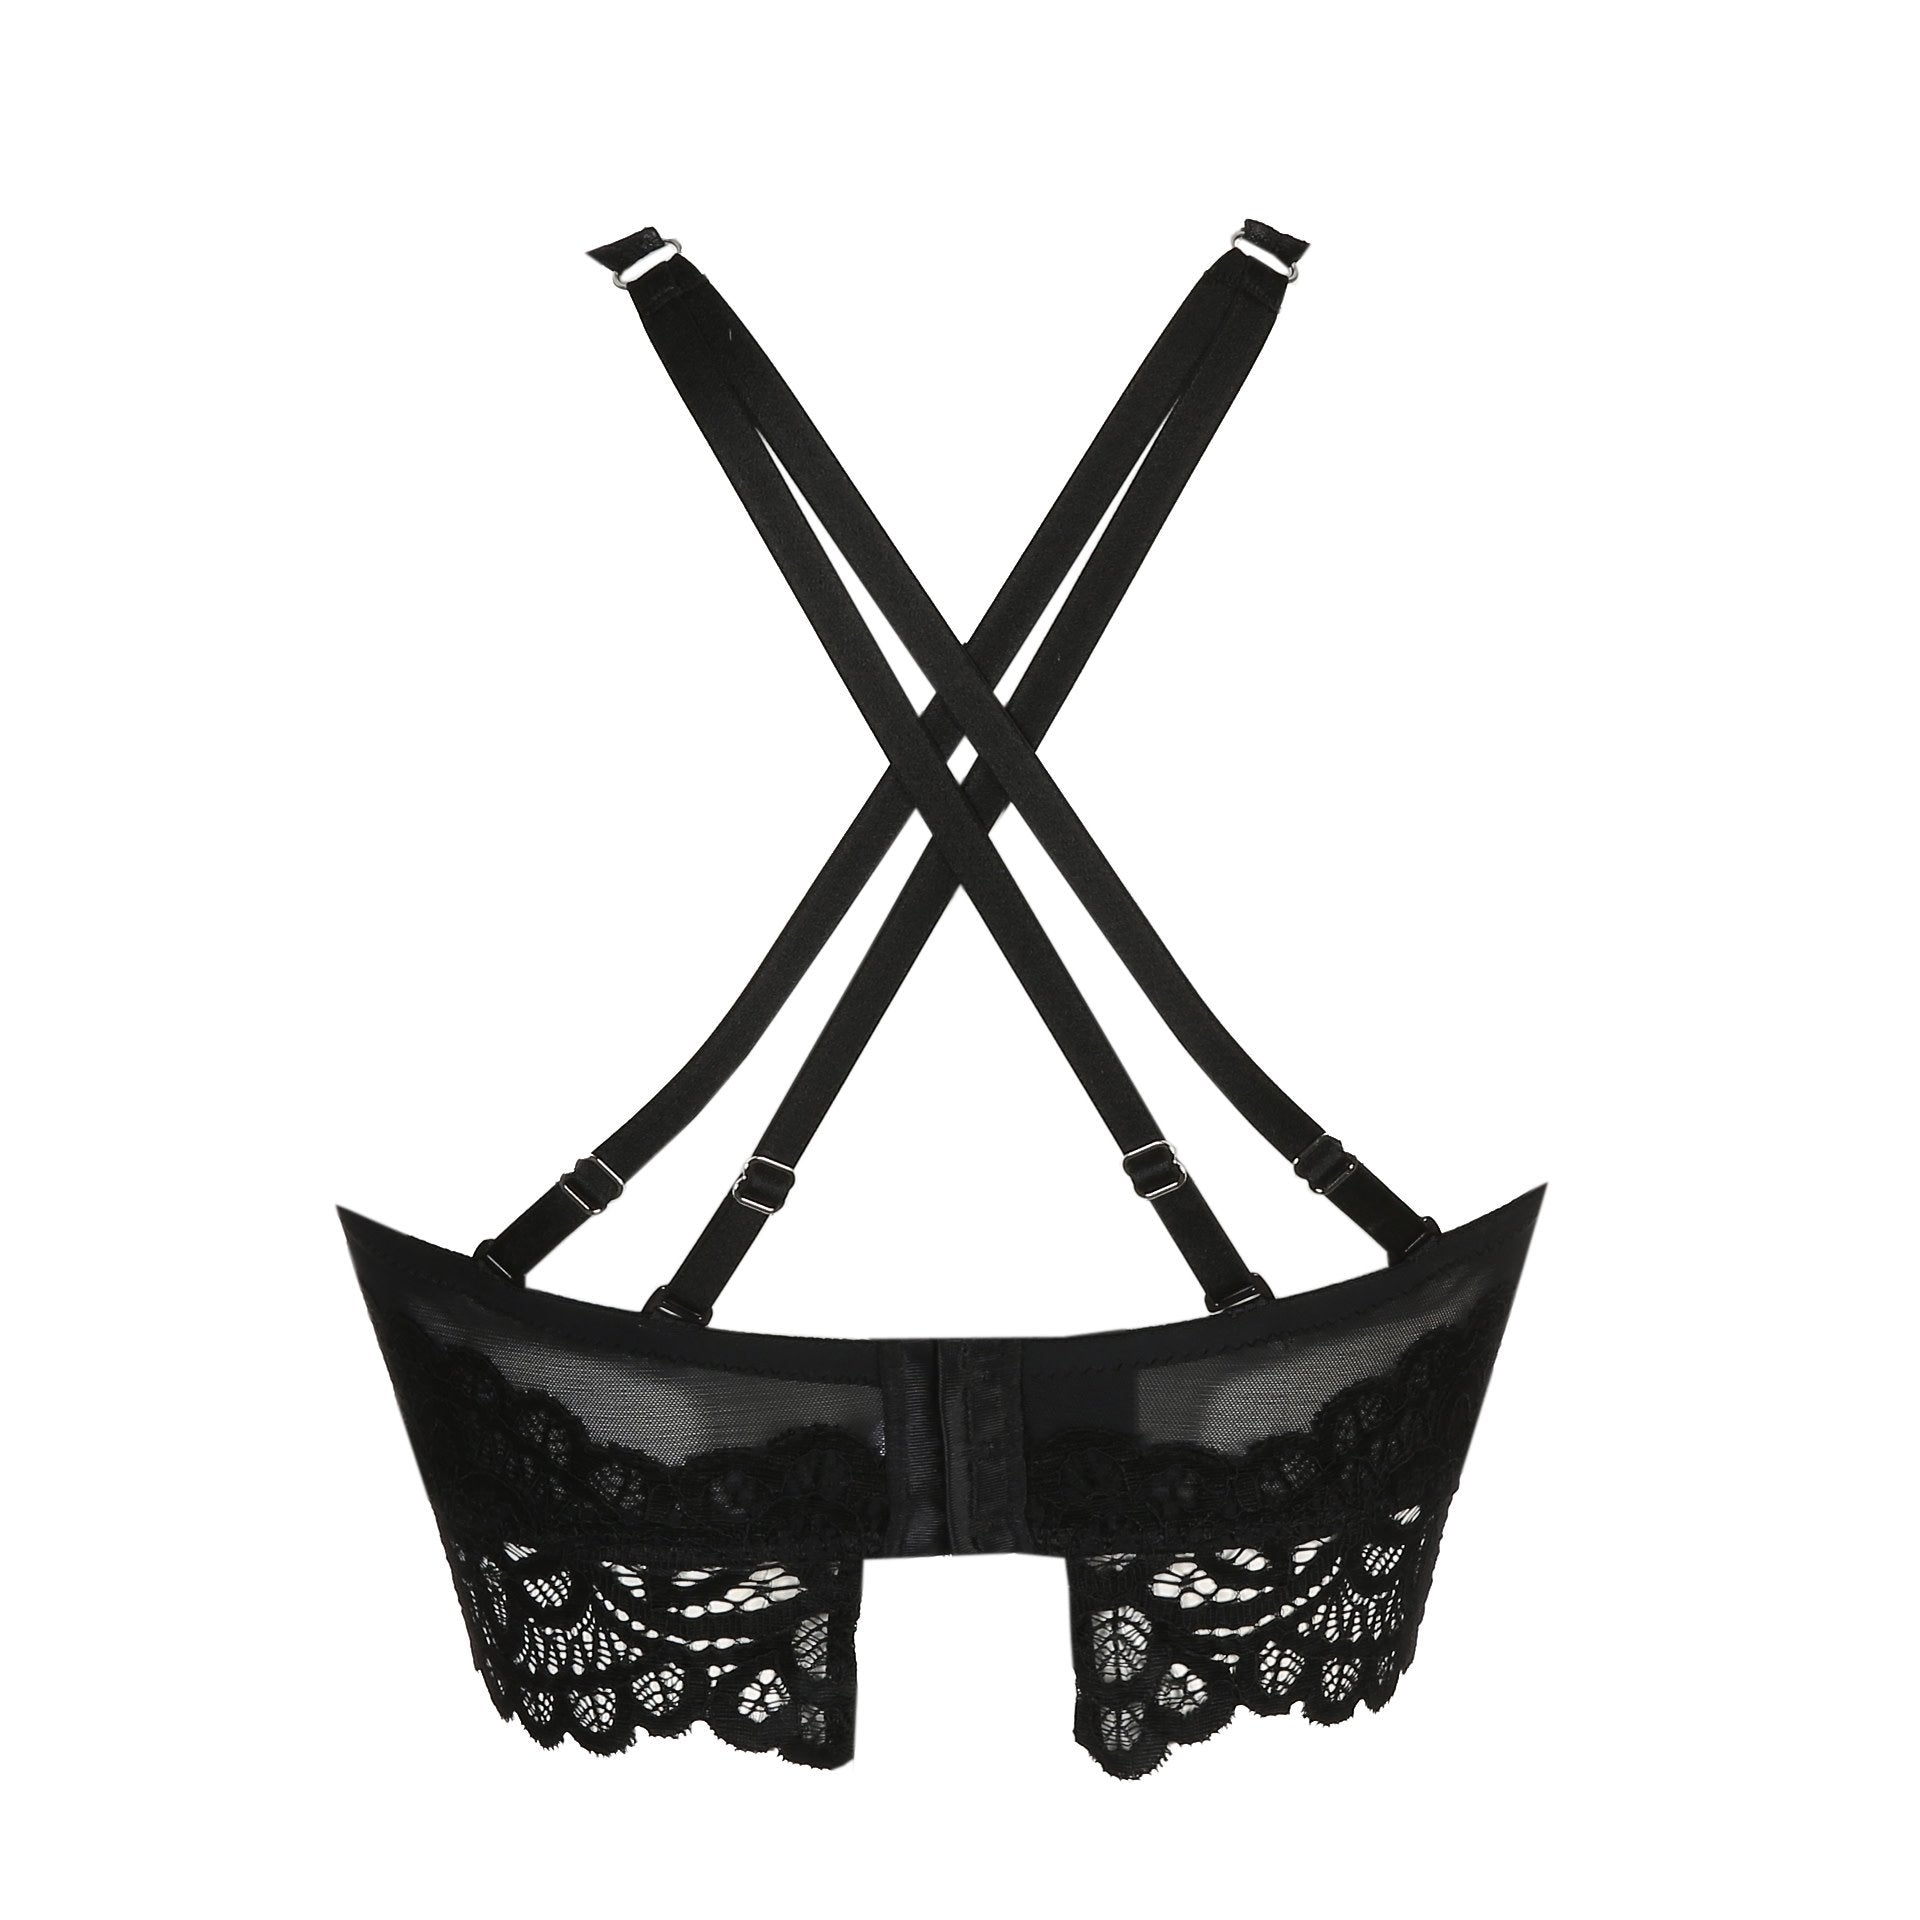 Prima Donna First Night Triangel Bra - Underwire Bra  Available at Illusions Lingerie